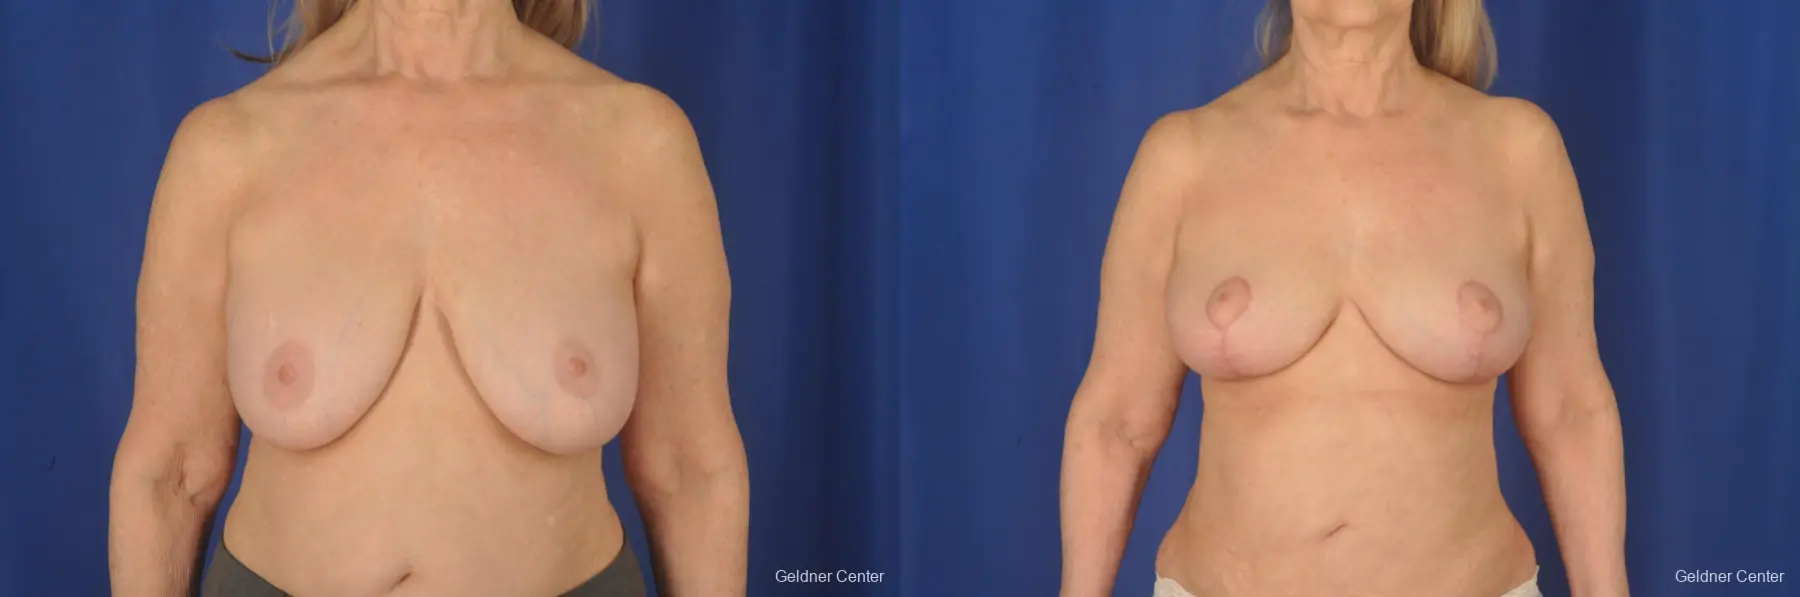 Complex Breast Augmentation: Patient 3 - Before and After 1